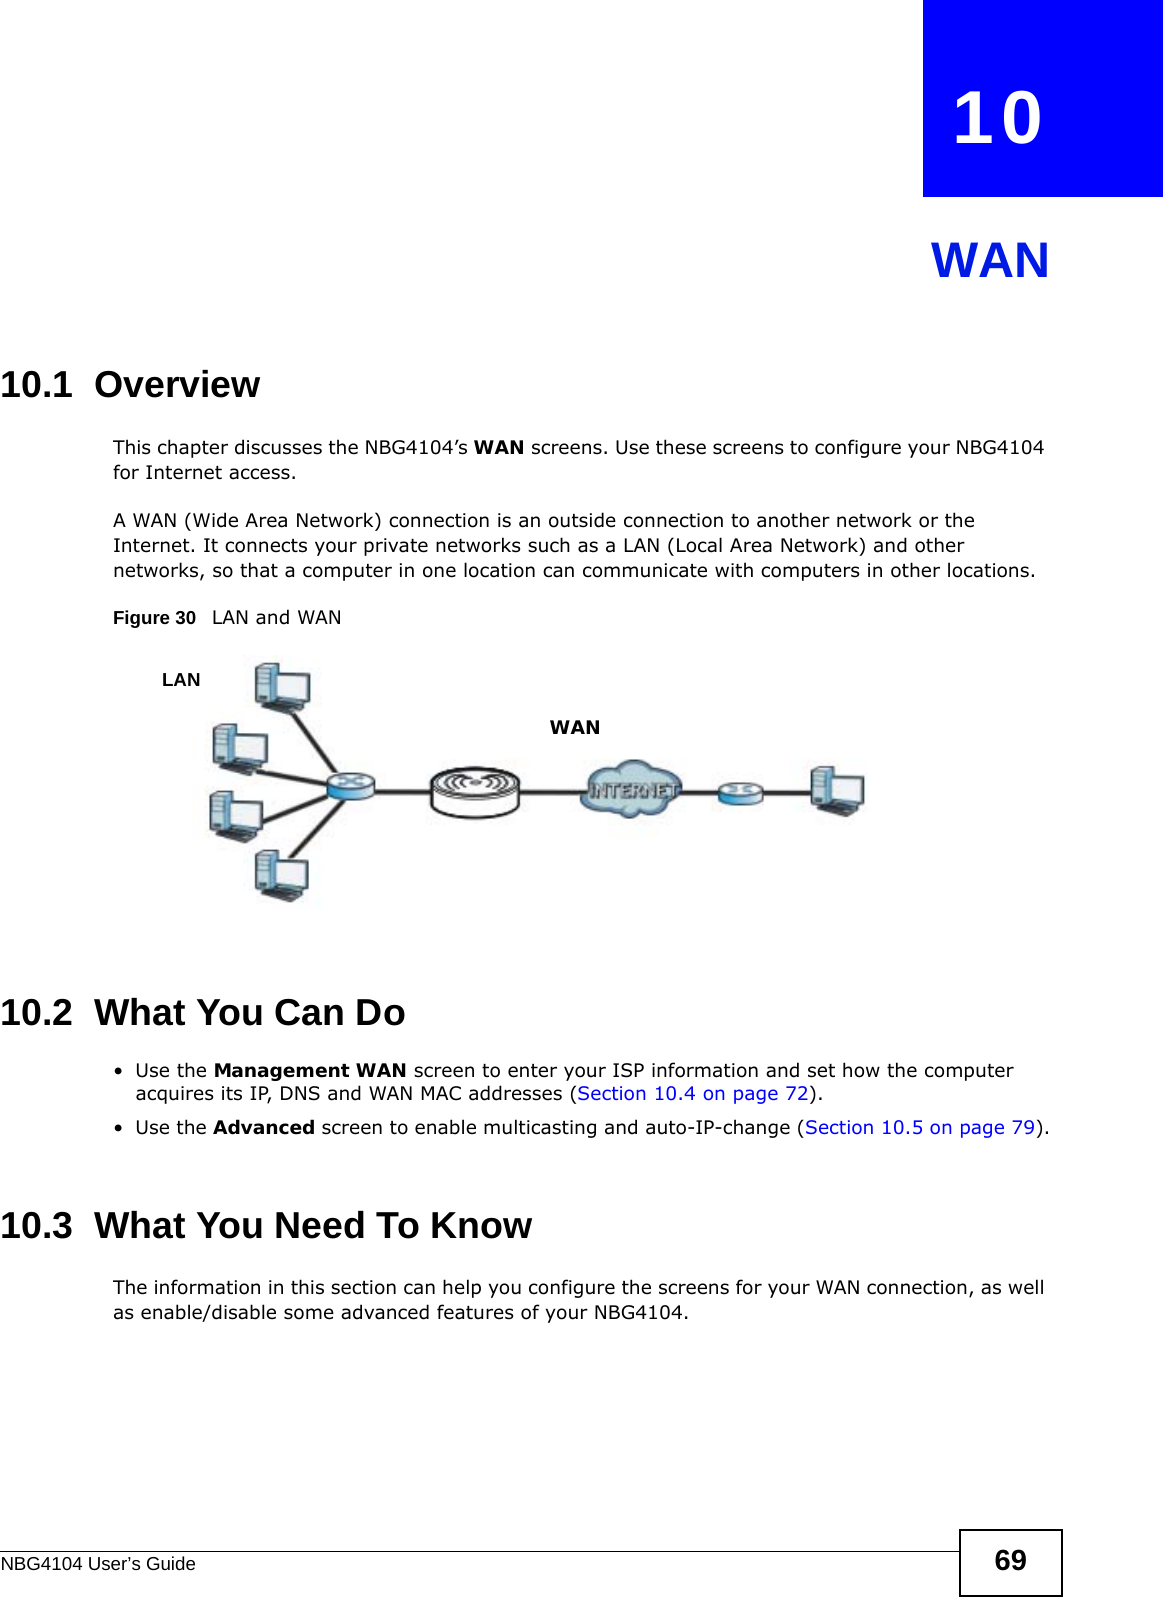 NBG4104 User’s Guide 69CHAPTER   10WAN10.1  OverviewThis chapter discusses the NBG4104’s WAN screens. Use these screens to configure your NBG4104 for Internet access.A WAN (Wide Area Network) connection is an outside connection to another network or the Internet. It connects your private networks such as a LAN (Local Area Network) and other networks, so that a computer in one location can communicate with computers in other locations.Figure 30   LAN and WAN10.2  What You Can Do•Use the Management WAN screen to enter your ISP information and set how the computer acquires its IP, DNS and WAN MAC addresses (Section 10.4 on page 72).•Use the Advanced screen to enable multicasting and auto-IP-change (Section 10.5 on page 79).10.3  What You Need To KnowThe information in this section can help you configure the screens for your WAN connection, as well as enable/disable some advanced features of your NBG4104.LANWAN